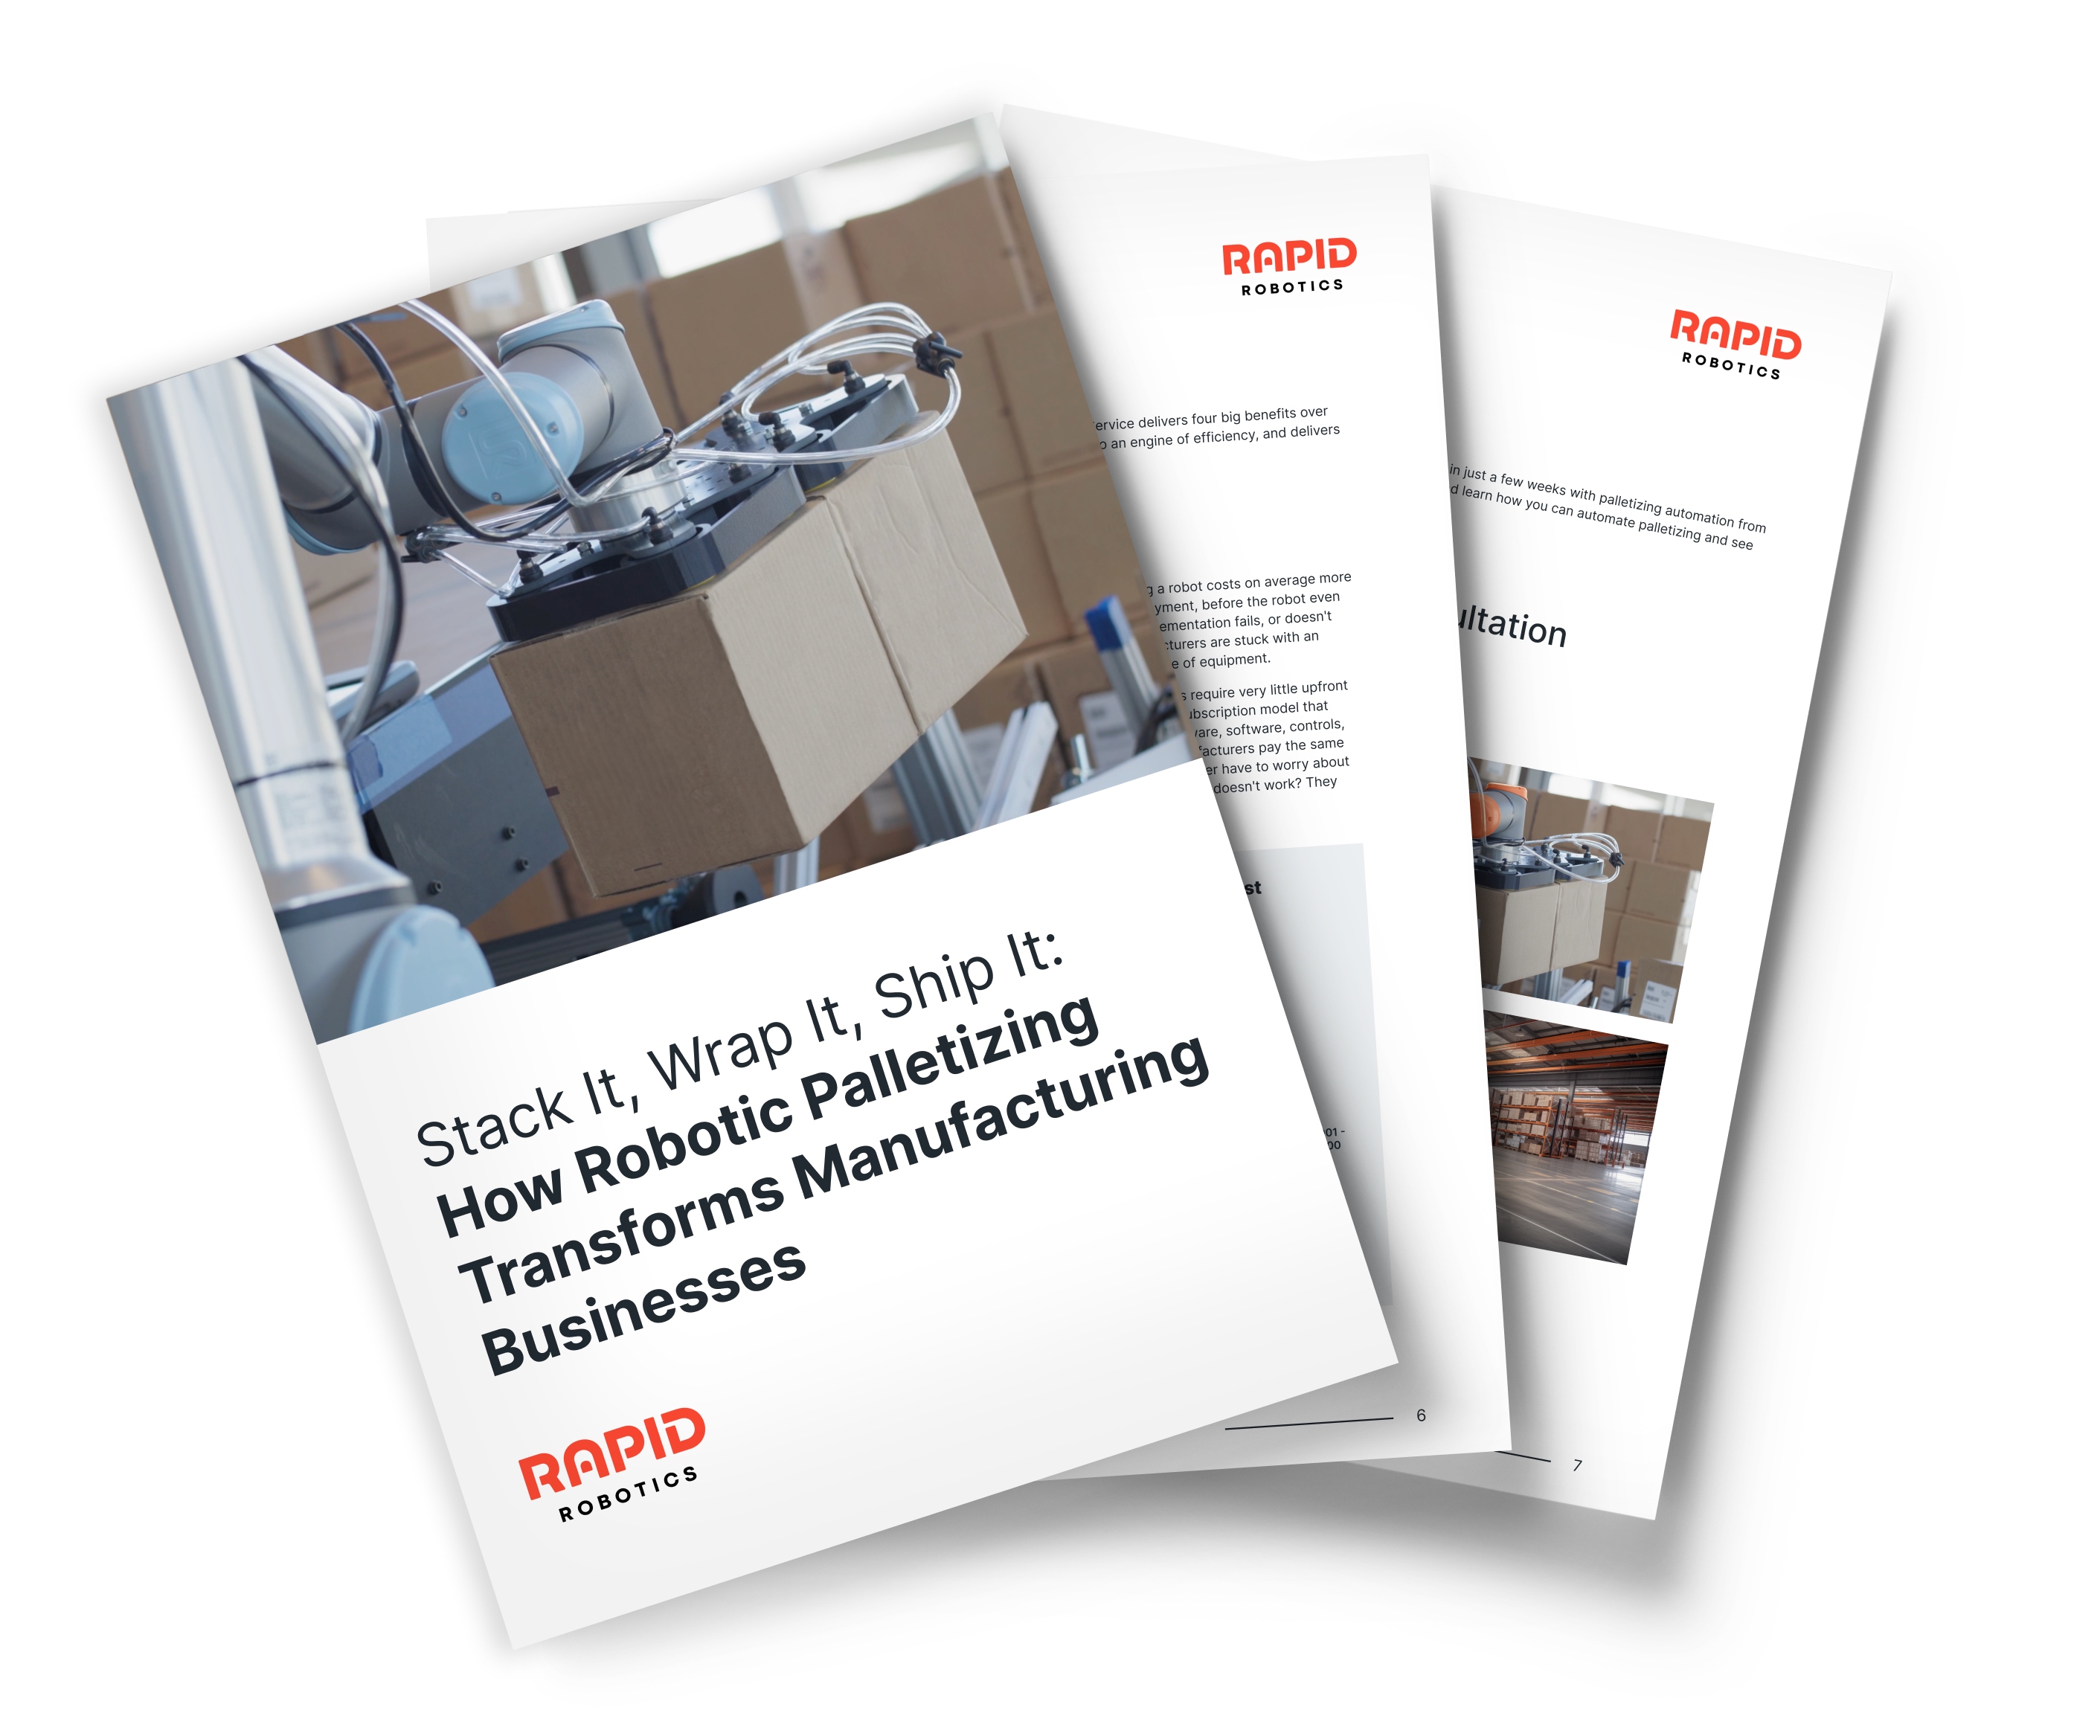 A fan of three pages from our white paper titled Stack It, Wrap It, Ship It: How Robotic Palletizing Transforms Manufacturing Businesses